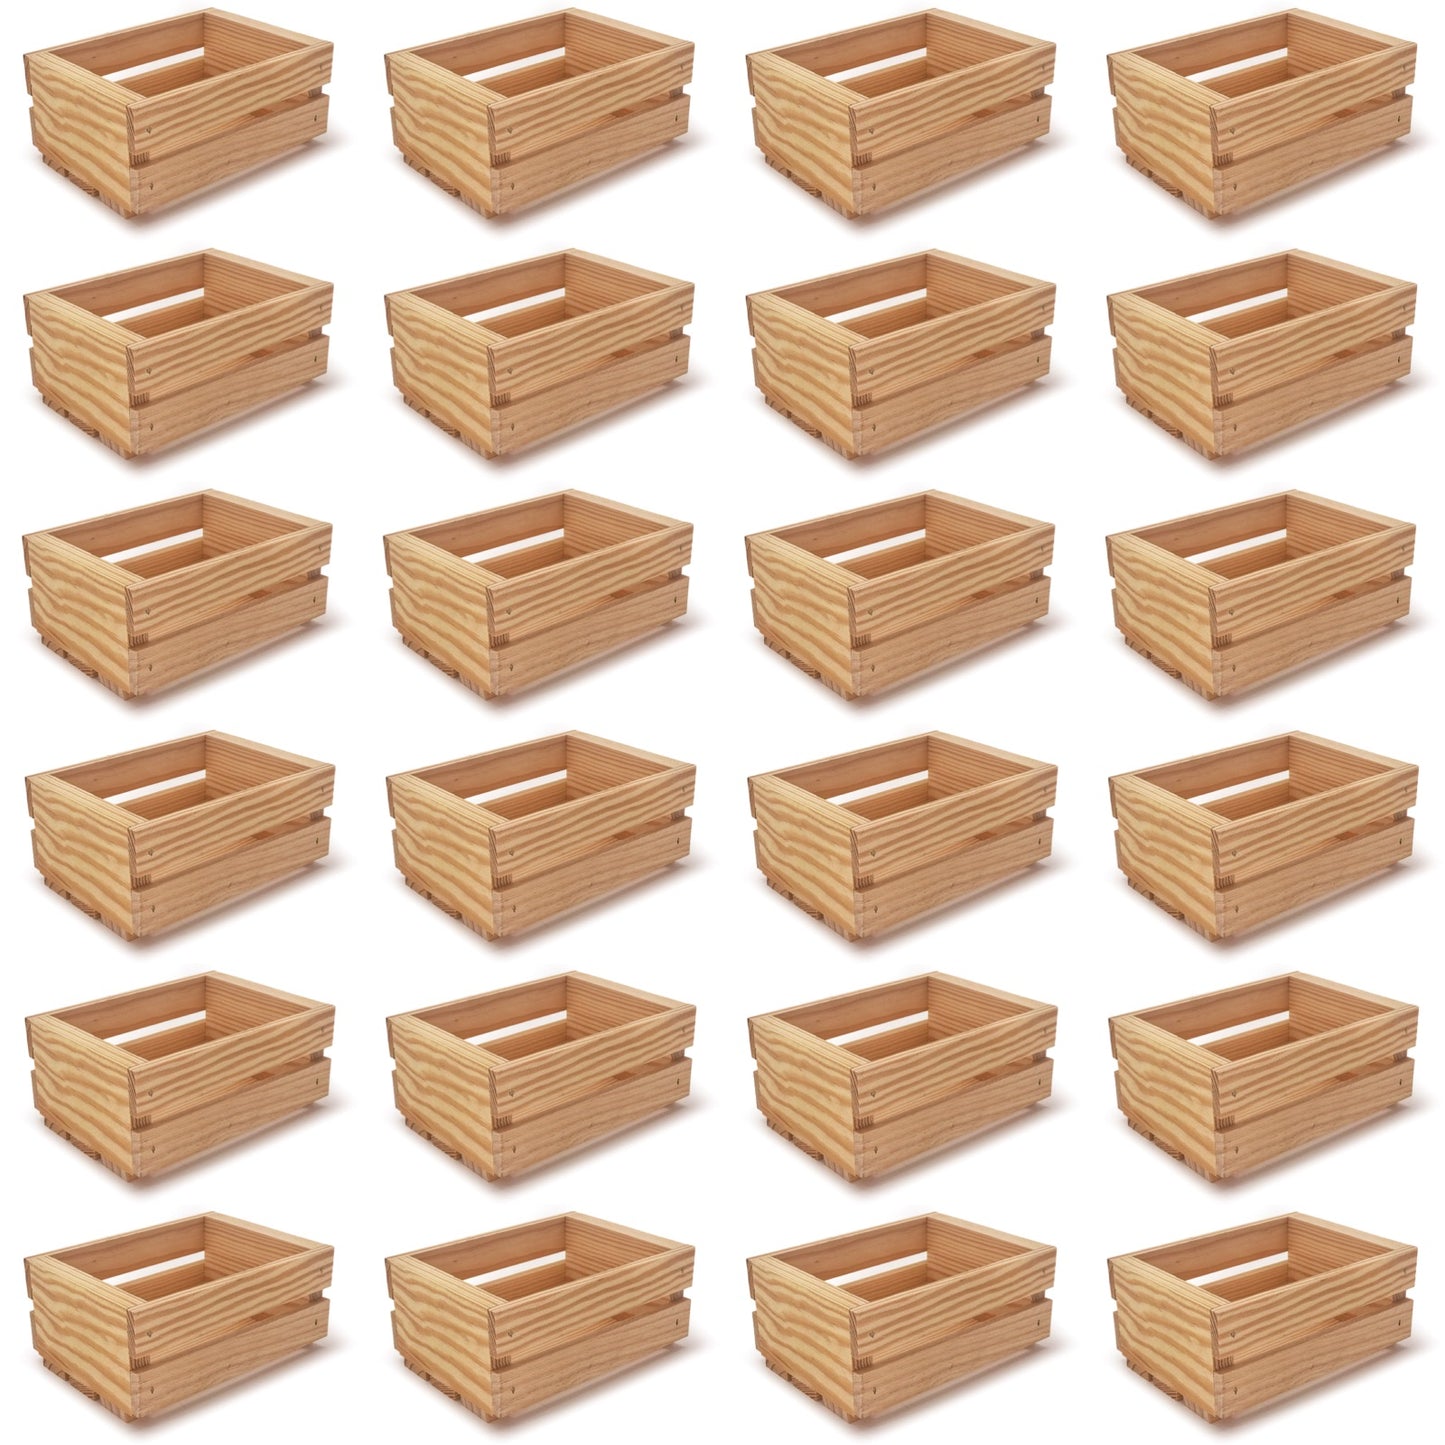 24 Small wooden crates 7.125x5.5x3.5